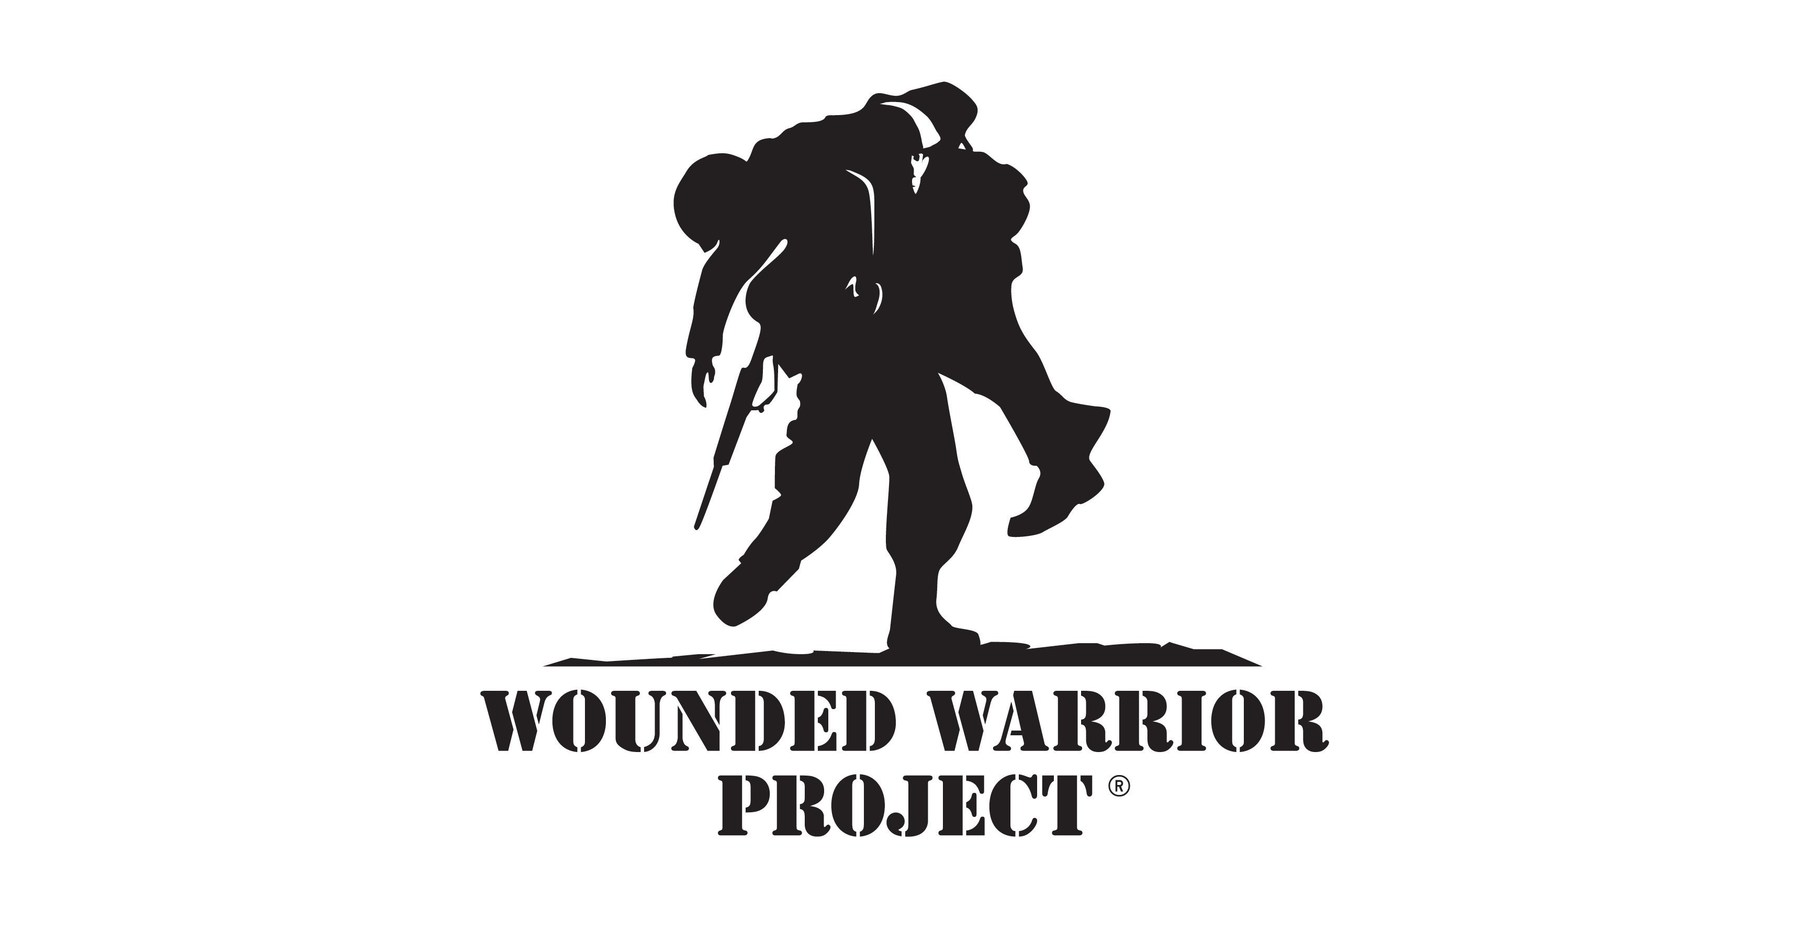 Wounded Warrior Project Joins BikePGH for Veterans Day Bike Ride